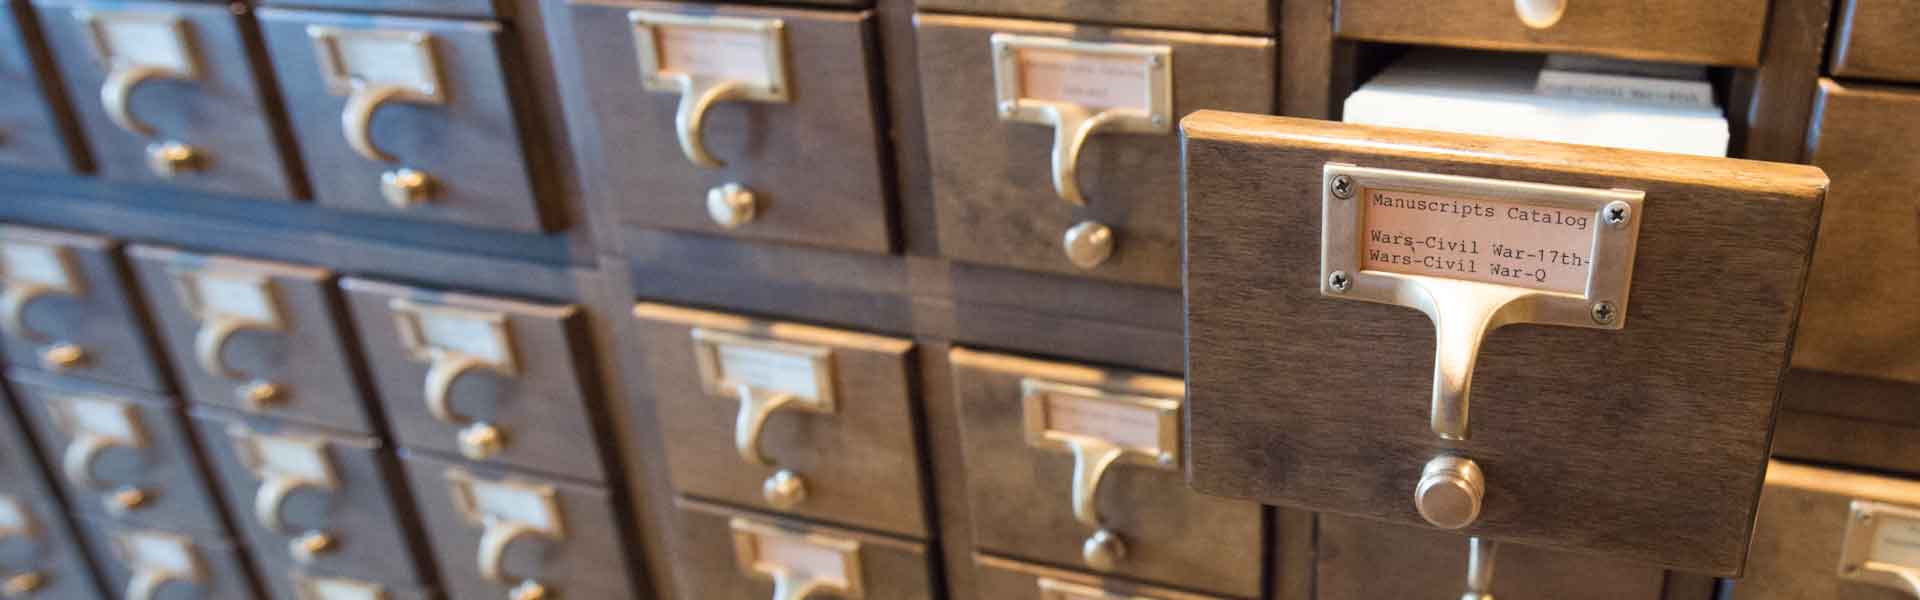 Card catalog with one open drawer